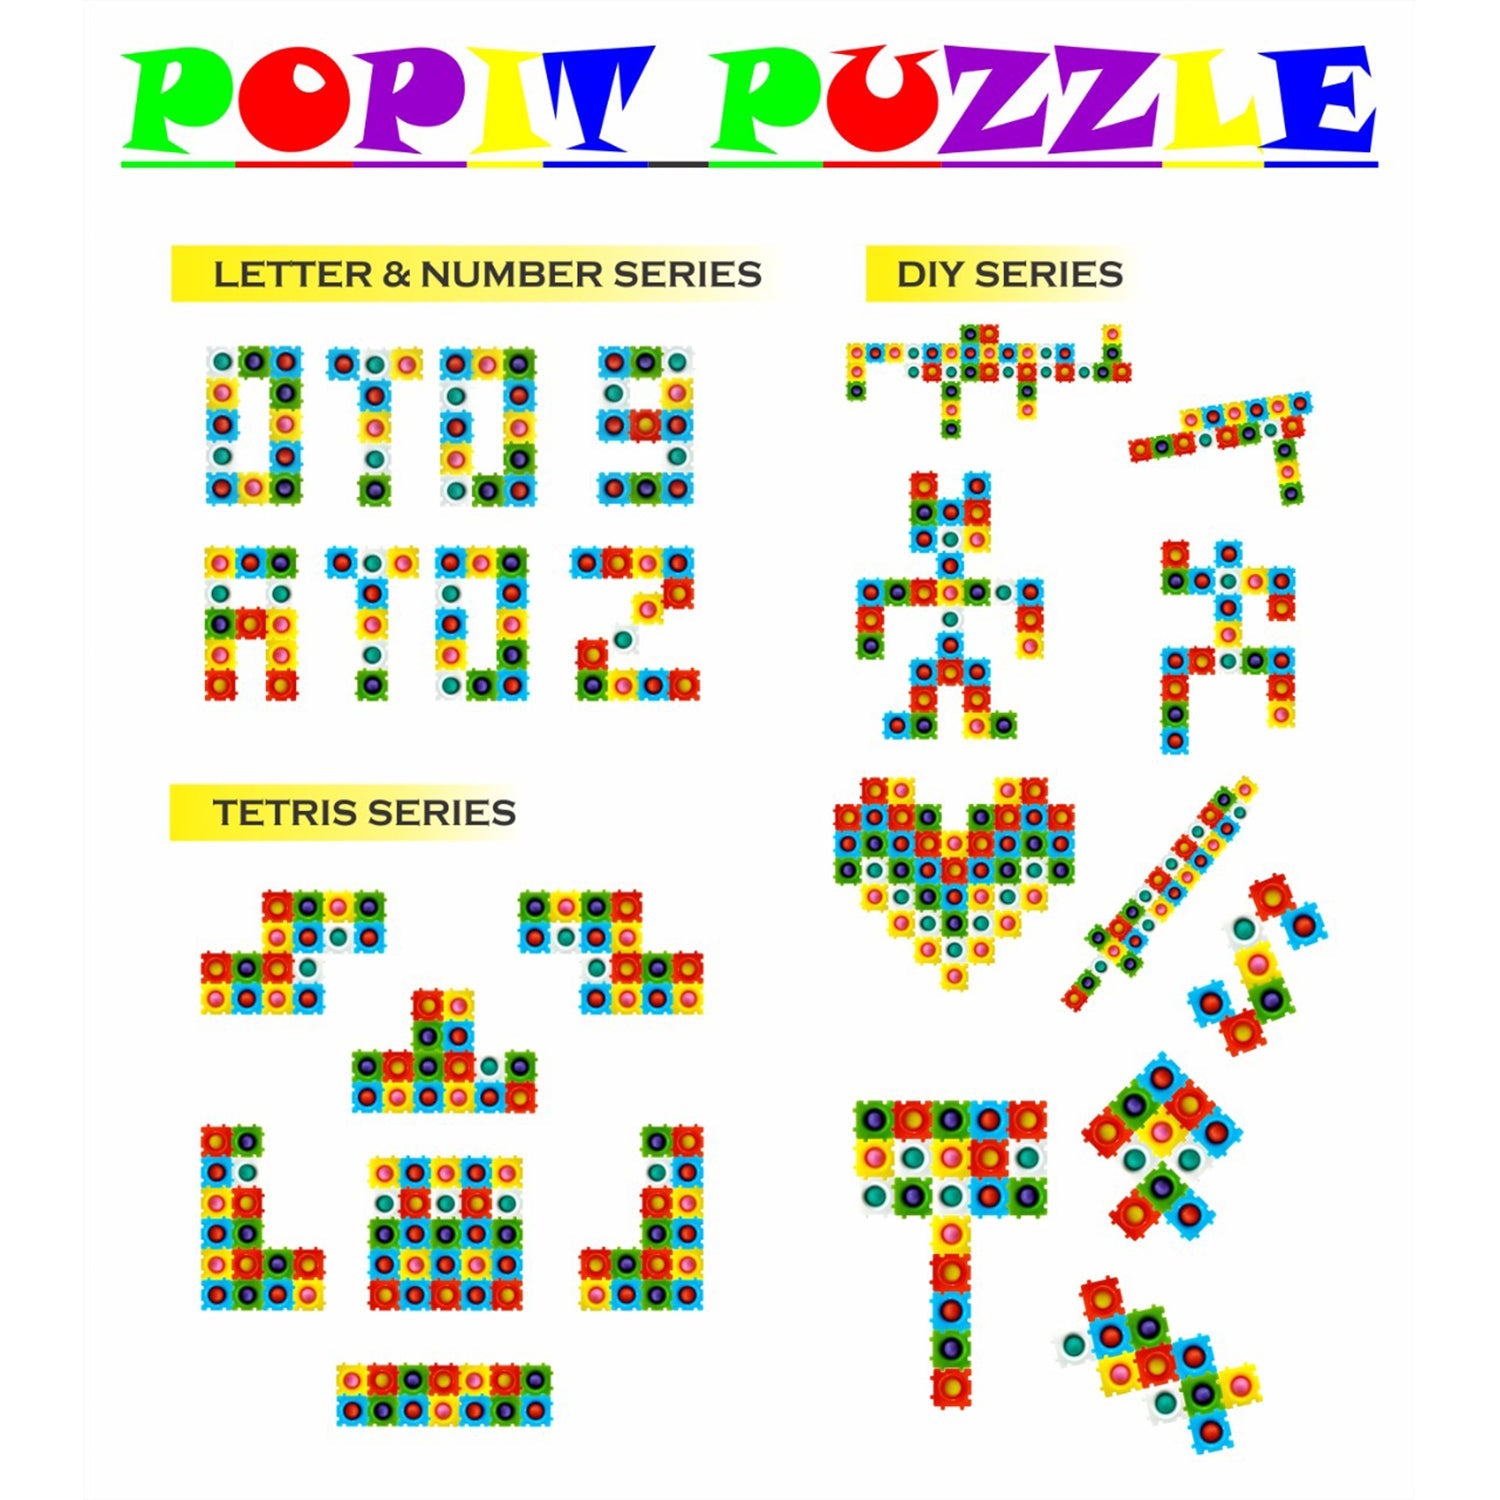 4788 Popit Puzzle Game 30Pc used by kids and children’s for playing and enjoying etc.